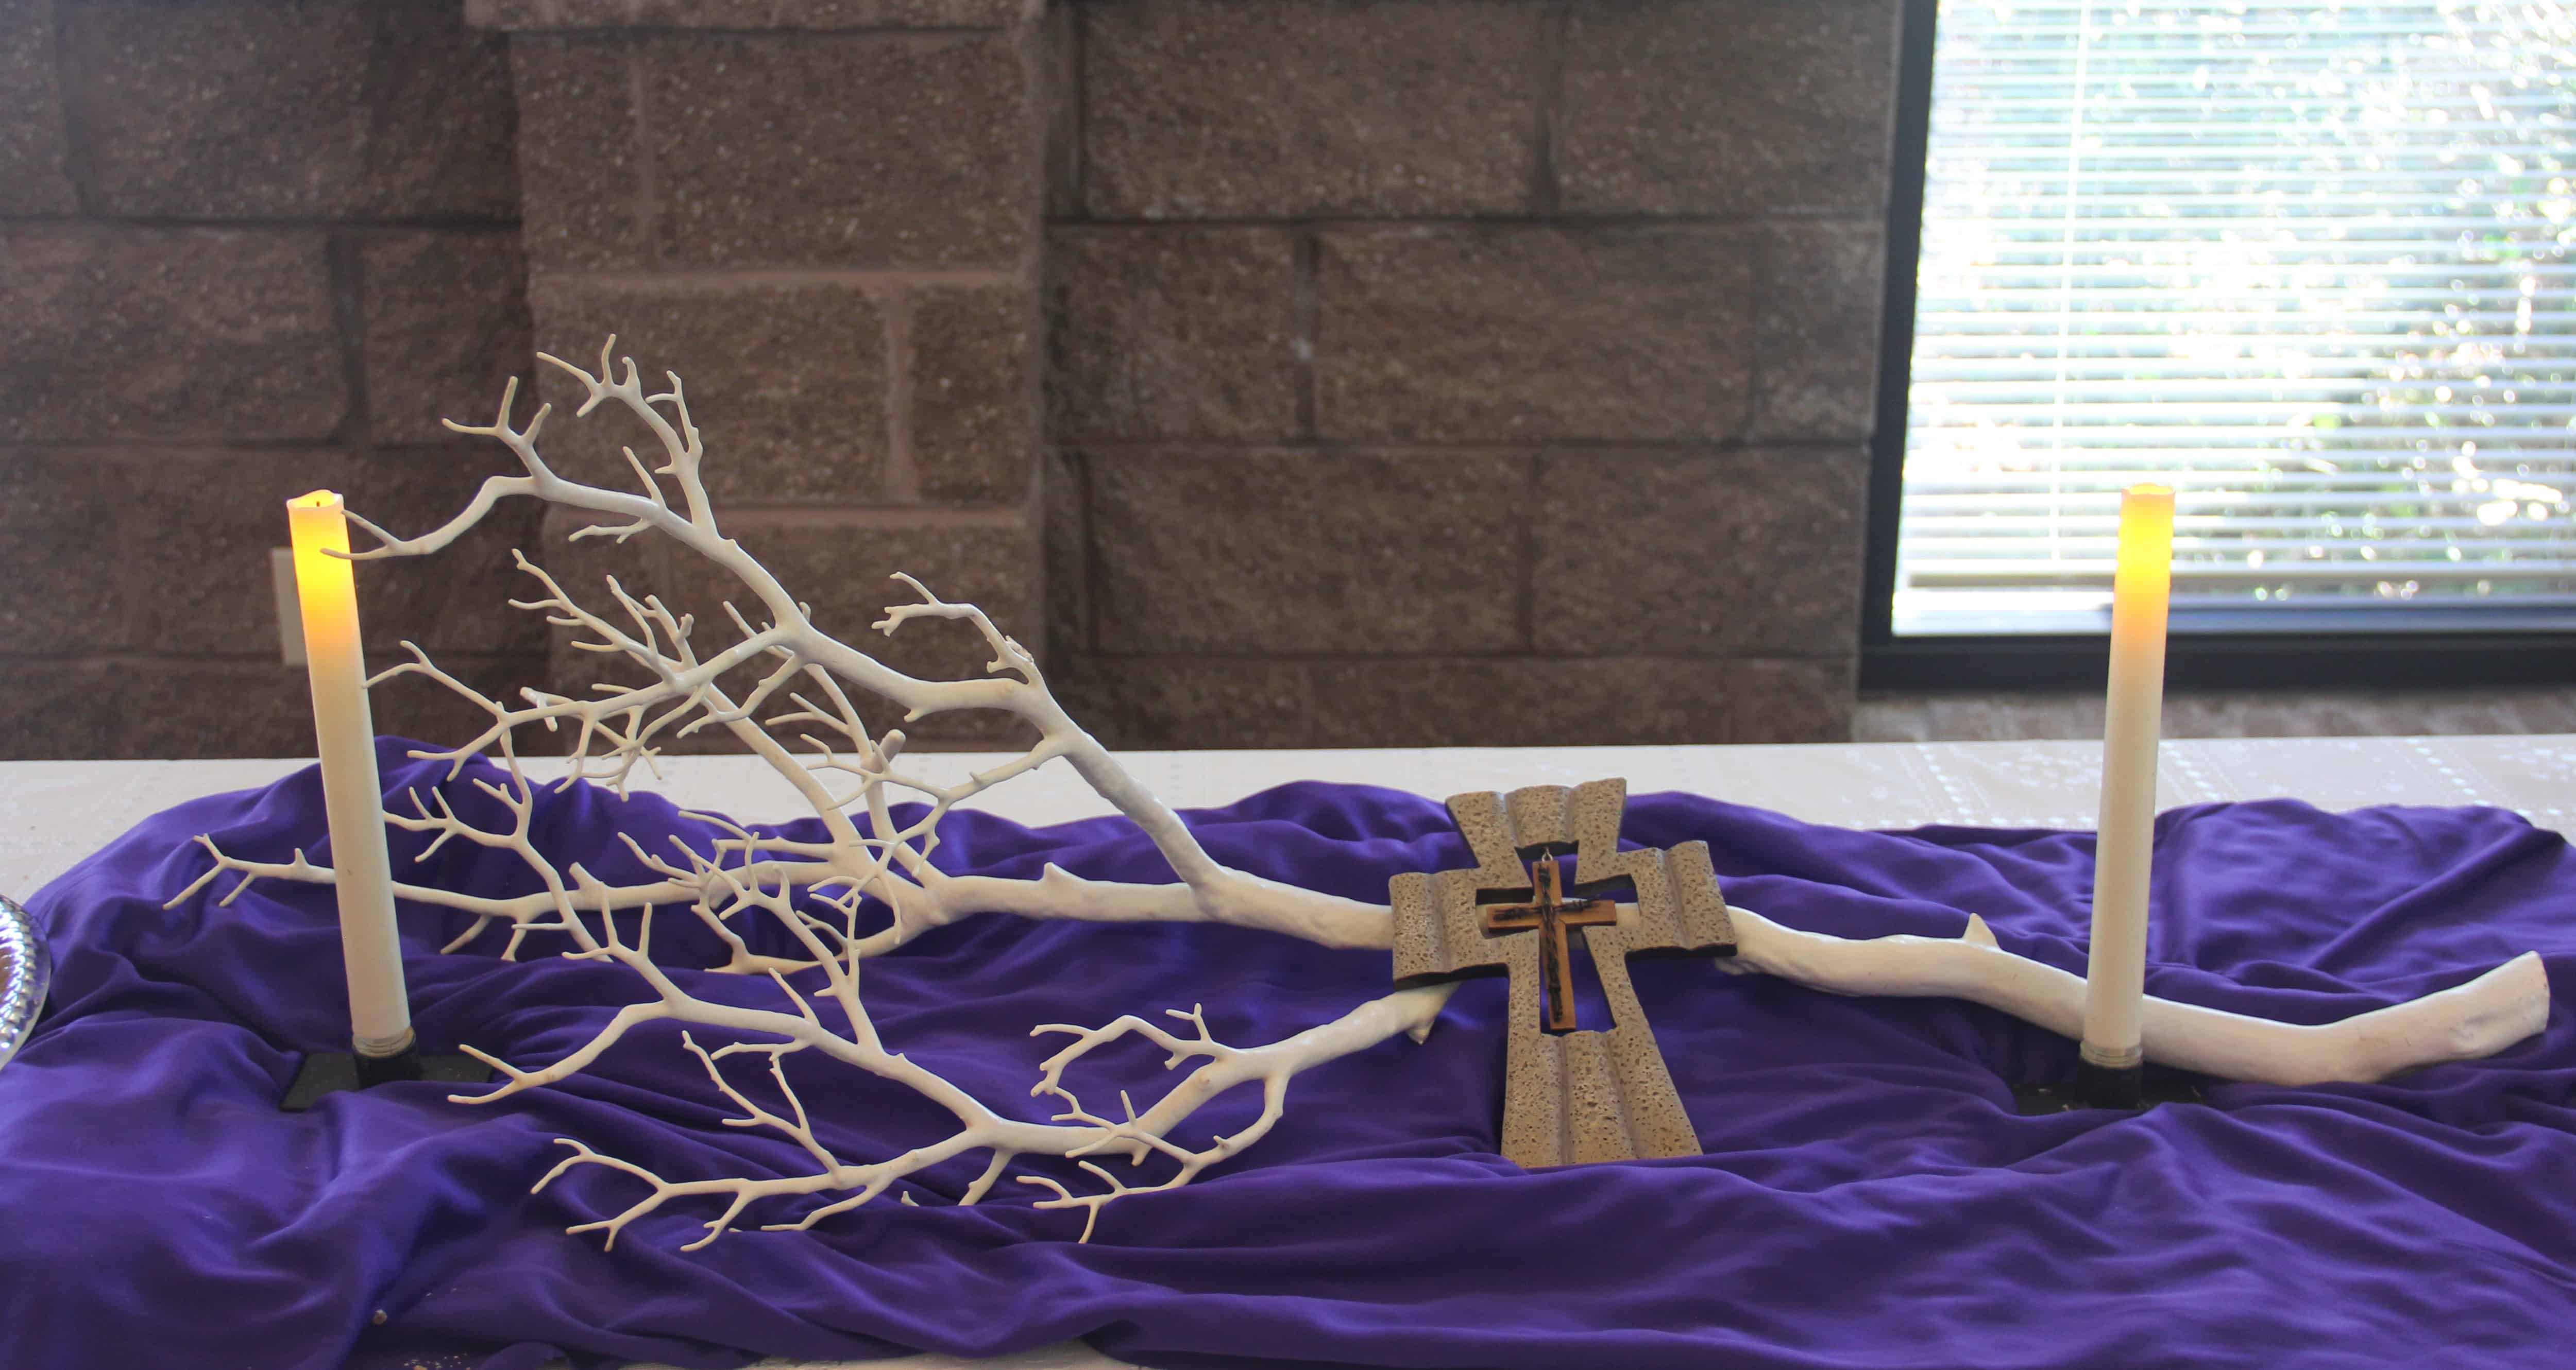 Stations of the Cross Every Friday During Lent